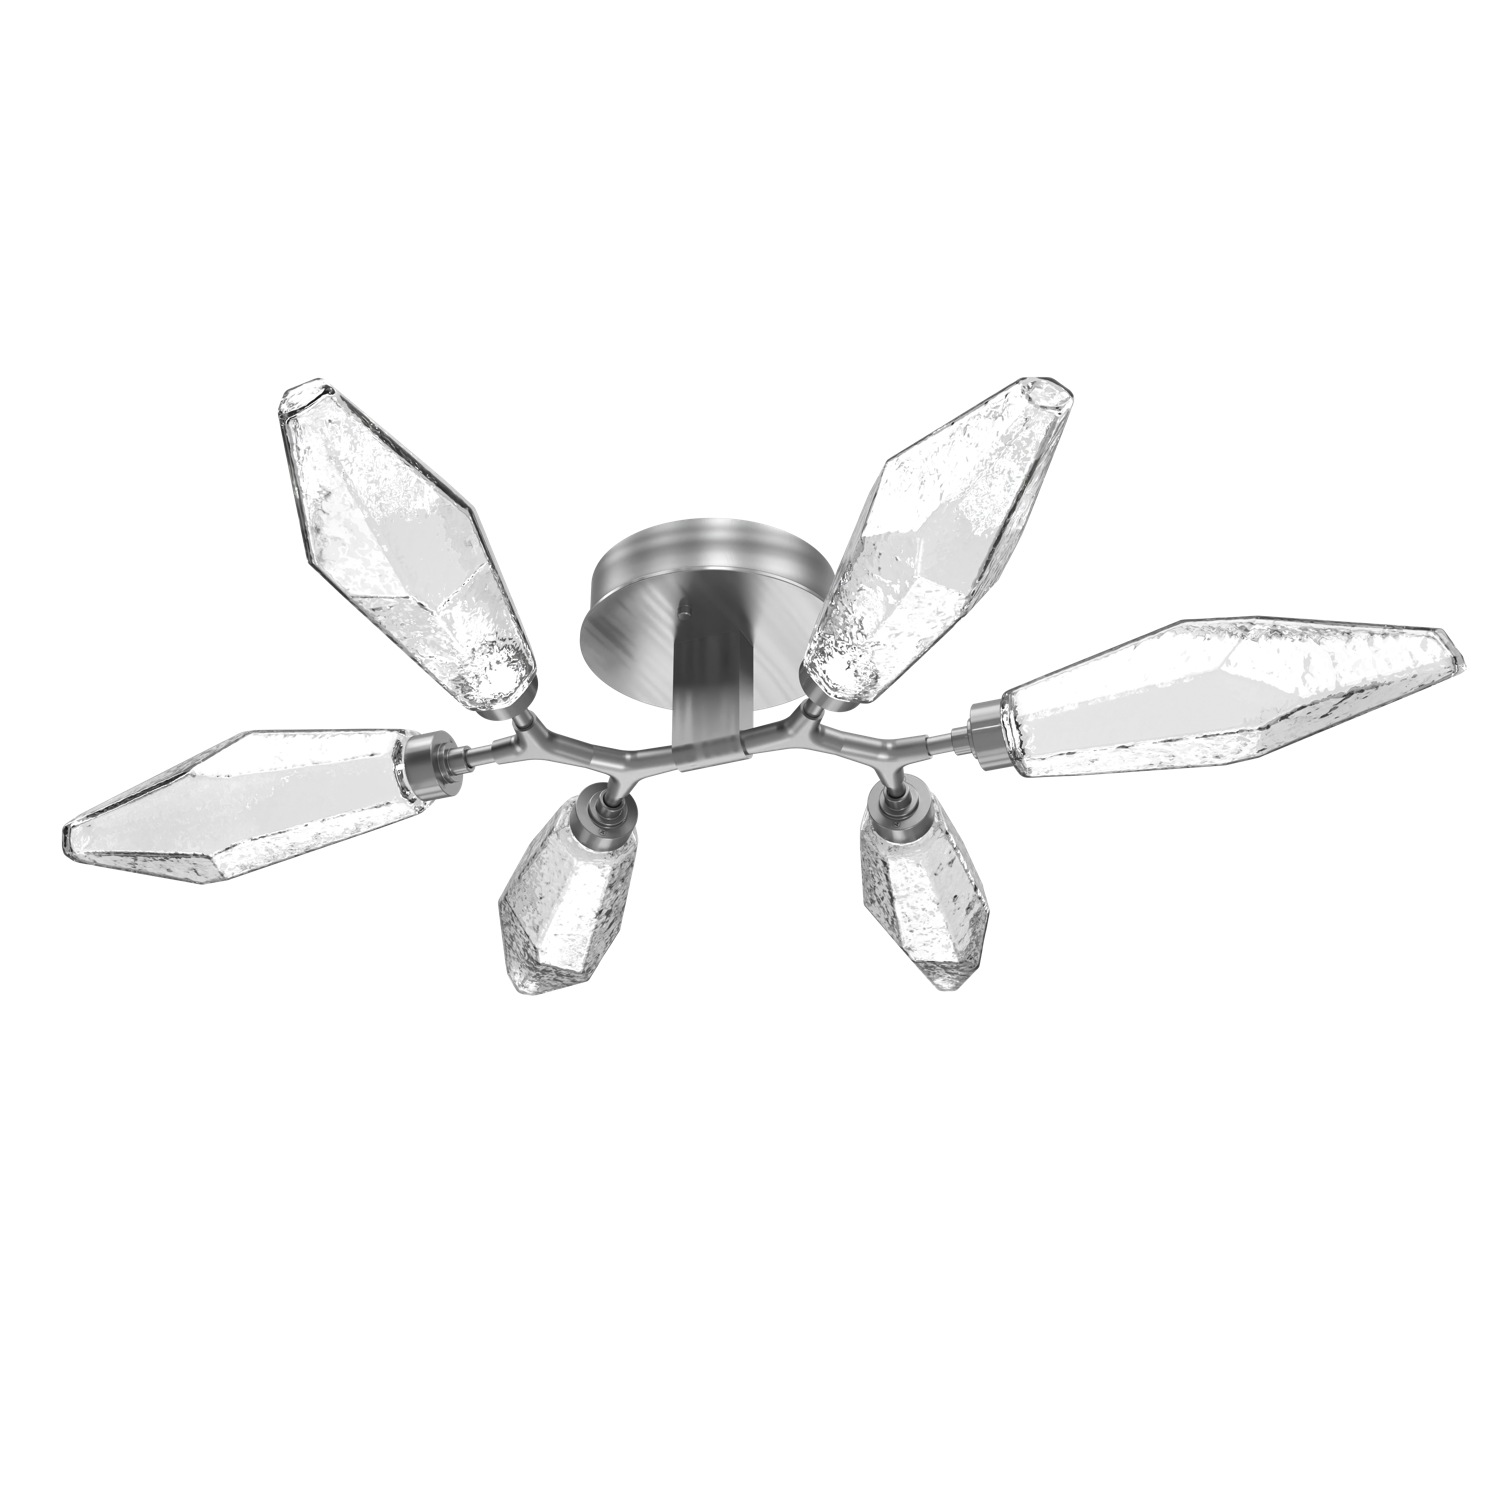 CLB0050-01-SN-CC-Hammerton-Studio-Rock-Crystal-flush-mount-light-with-satin-nickel-finish-and-clear-glass-shades-and-LED-lamping